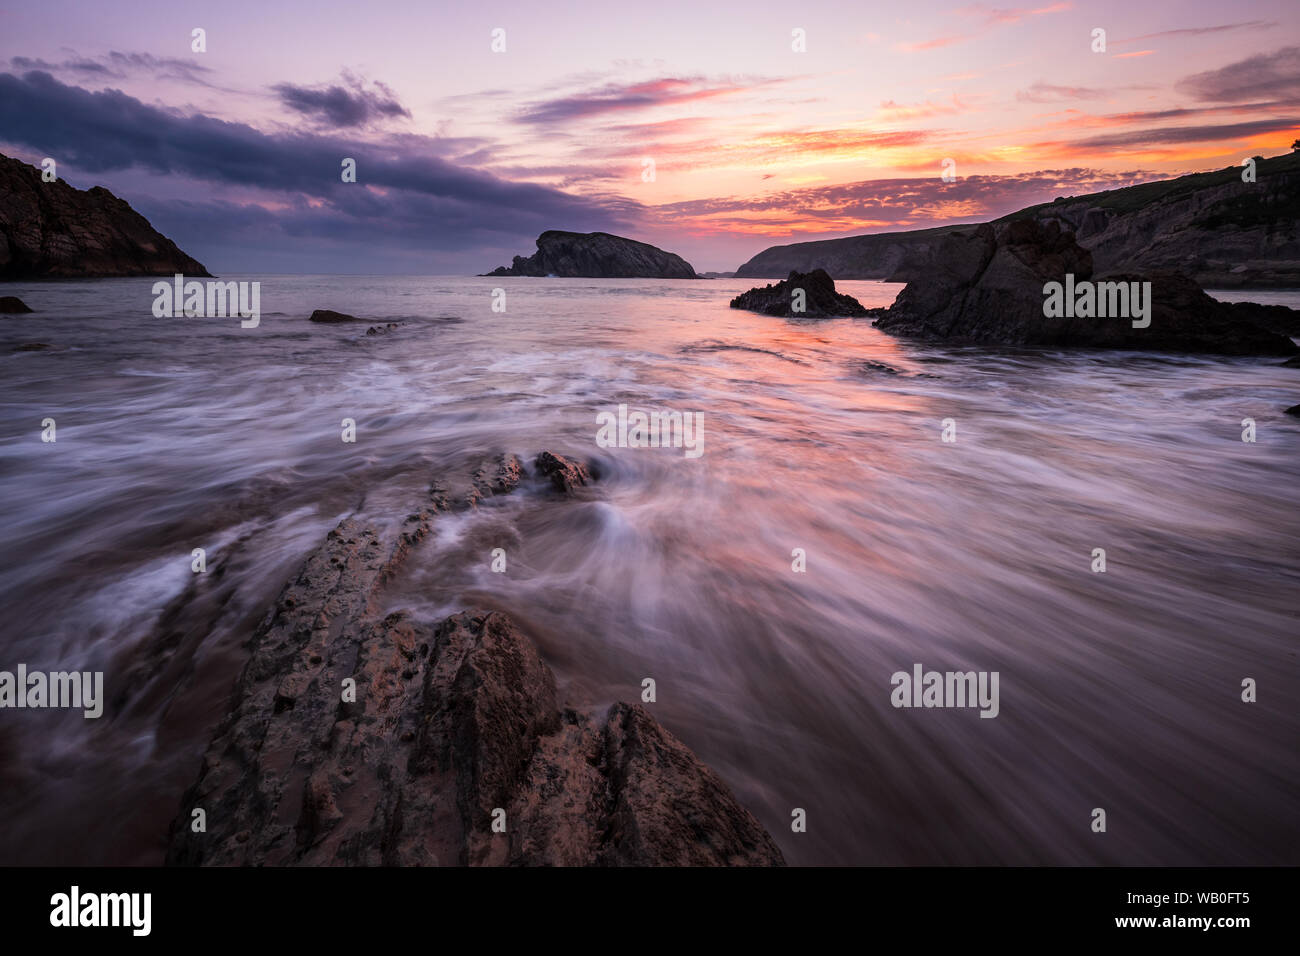 Colorful cloudy Sunrise at the beach of playa de la arnia with dynamic waves and bizarre rocks, Liencres, Northern Spain Stock Photo